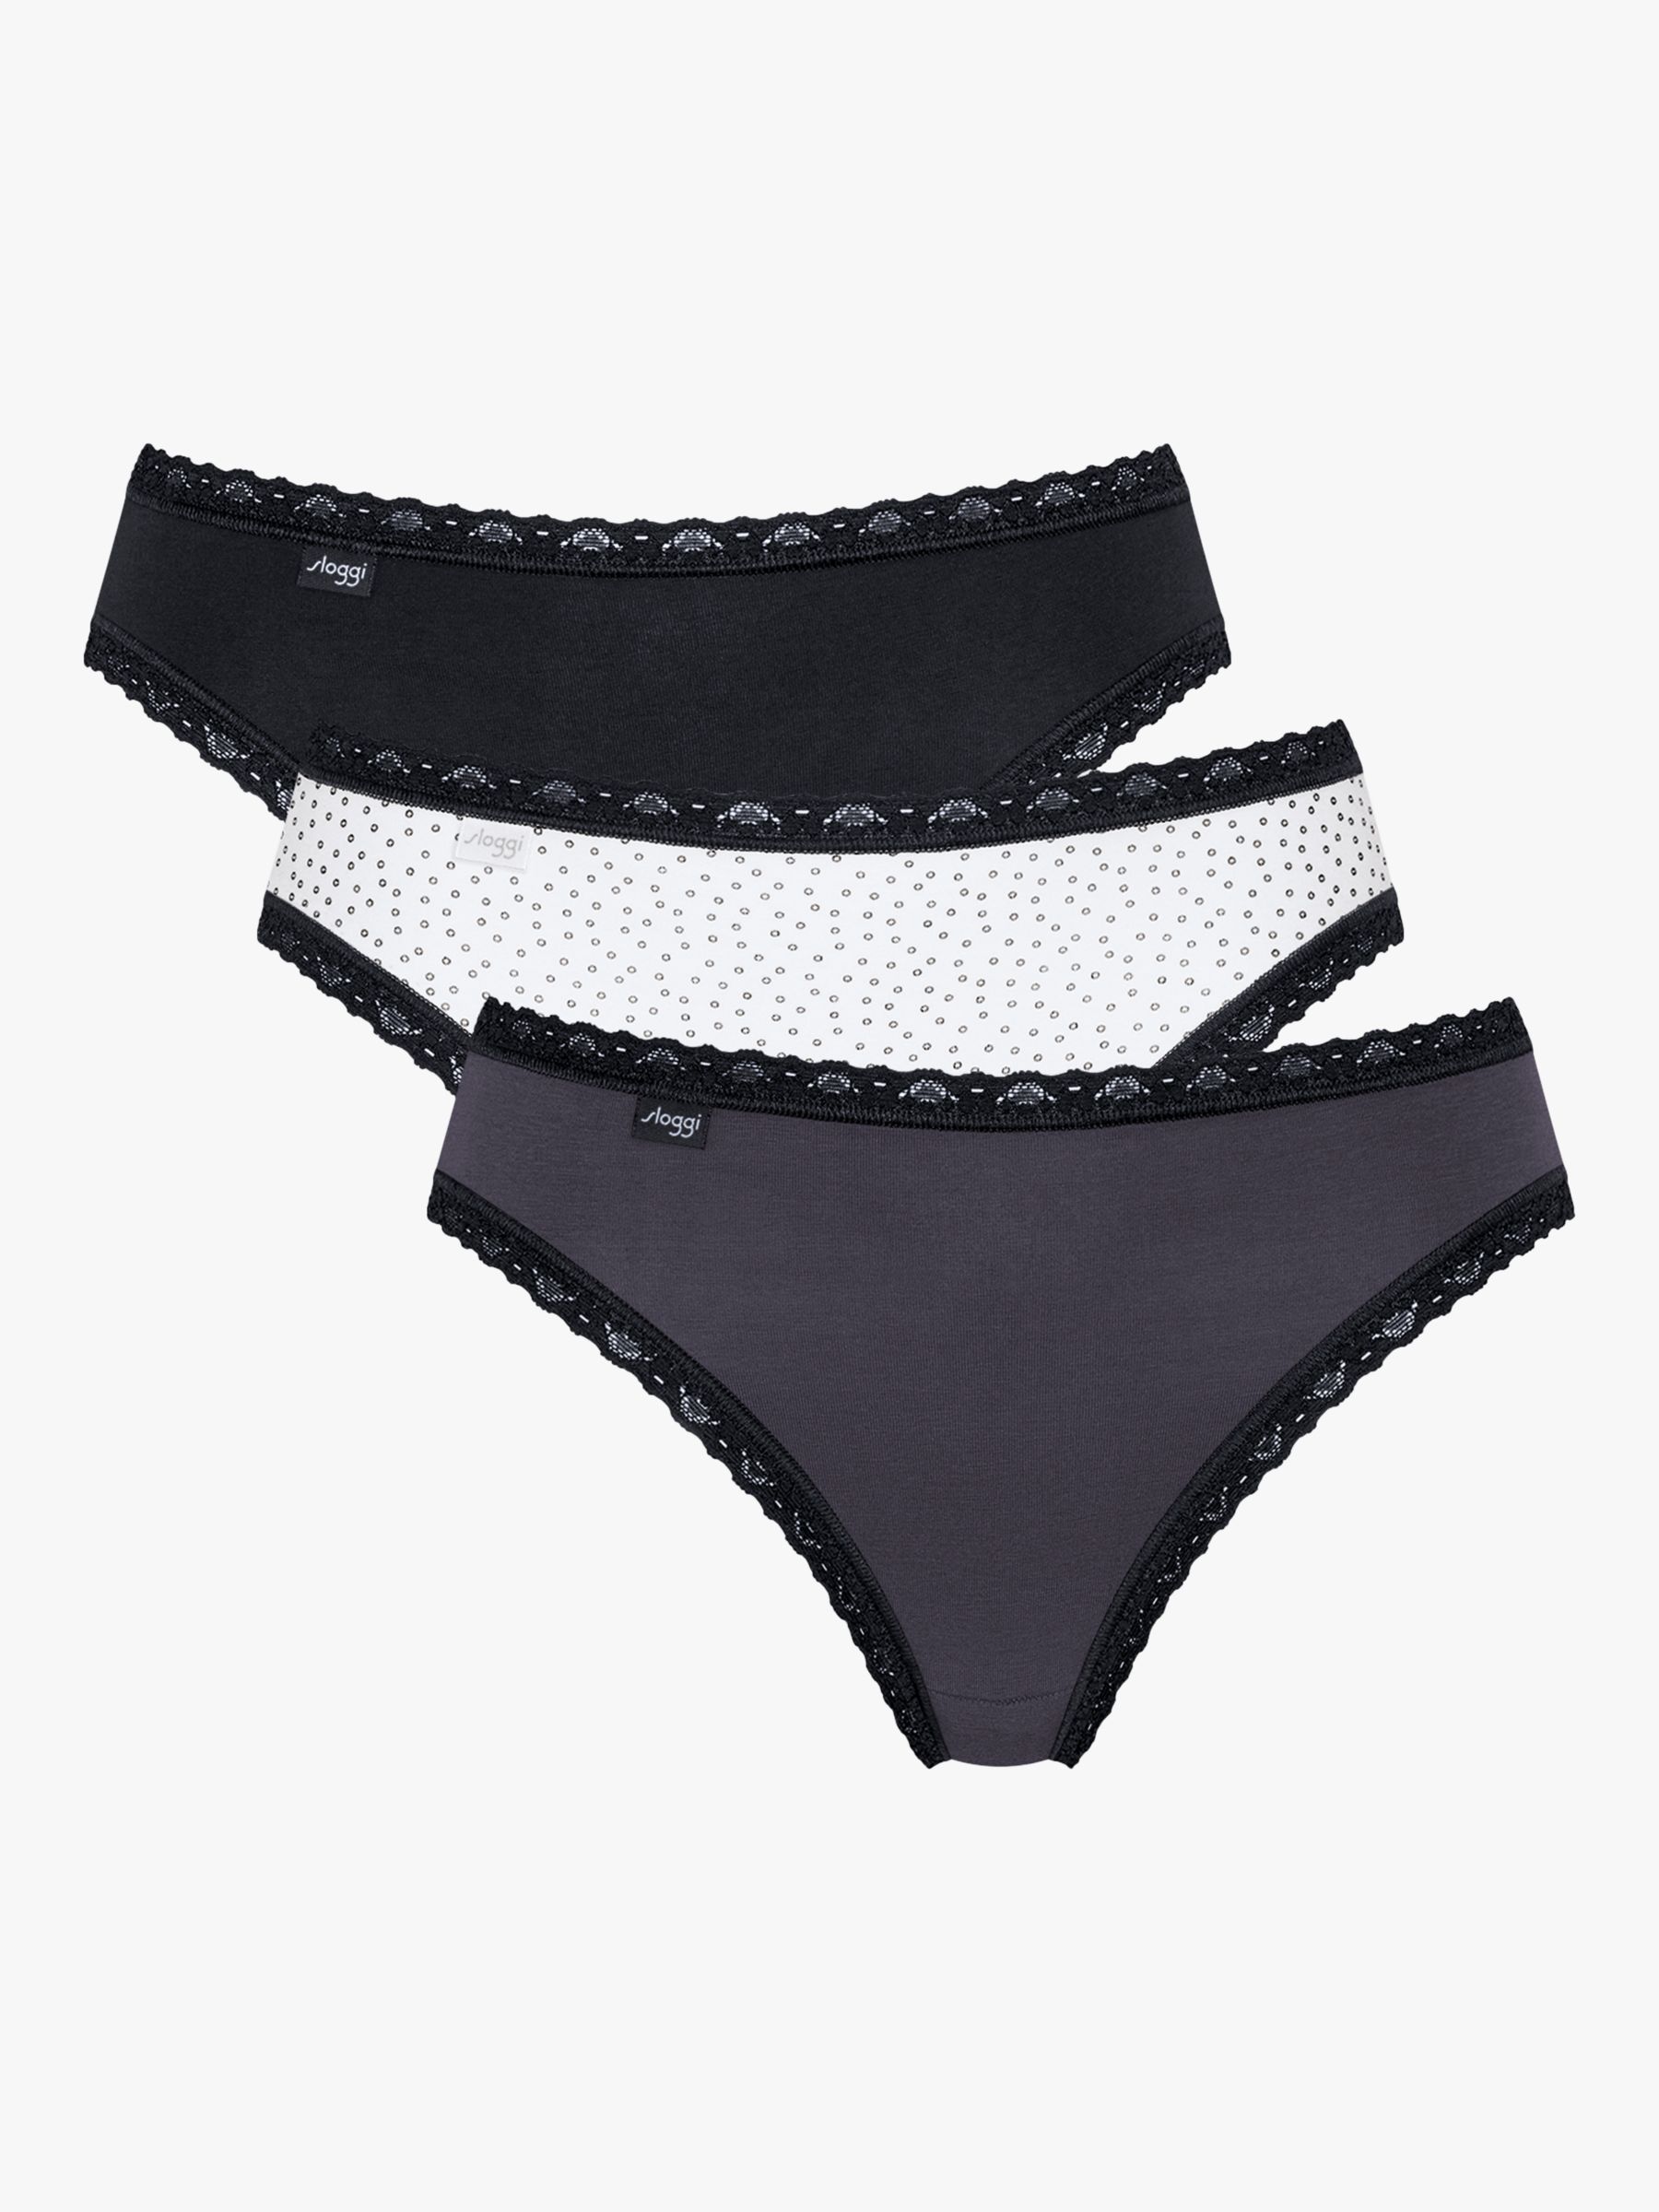 John Lewis ANYDAY Lace Trim Tanga Knickers, Pack of 3, Grey Marl/Cream at  John Lewis & Partners